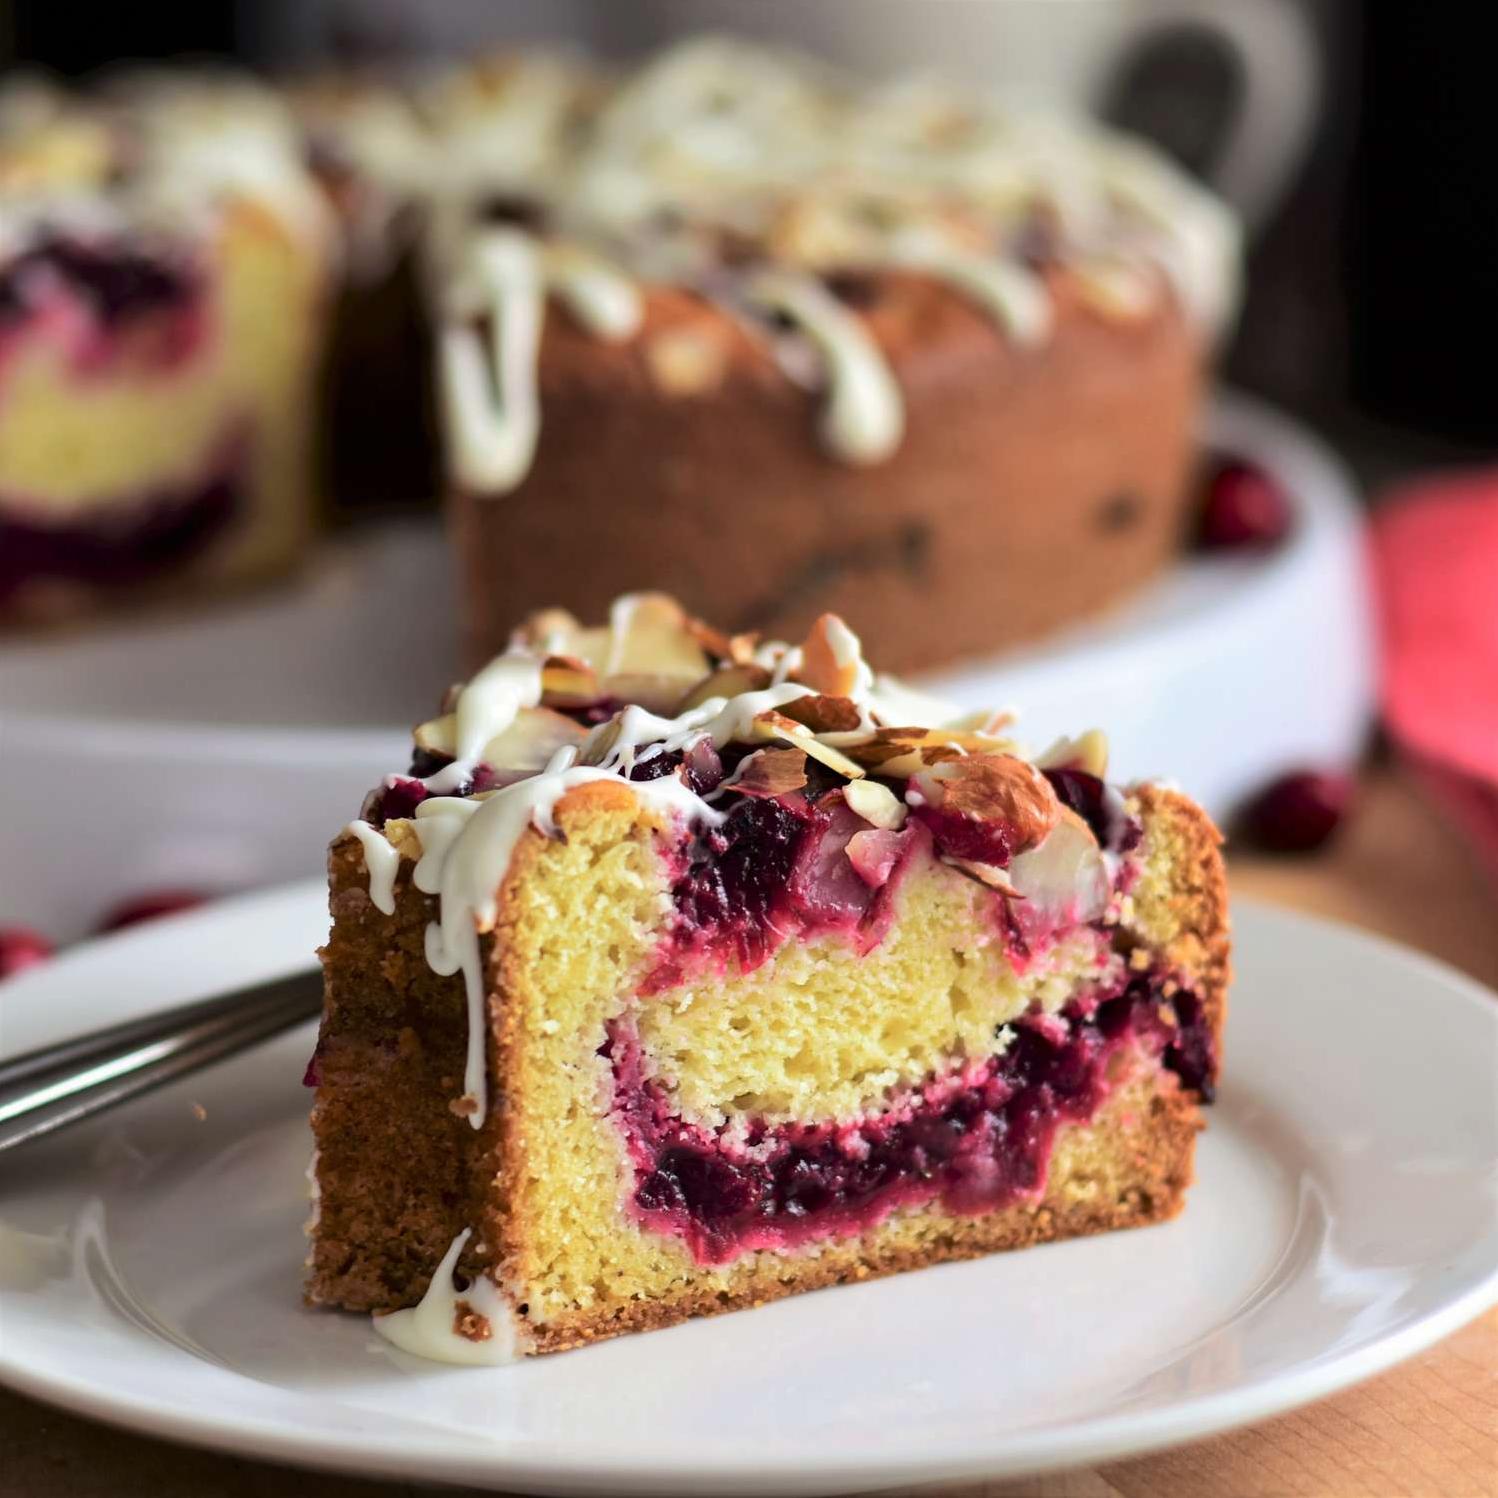  It doesn't get any better than a warm slice of Cranberry Swirl Coffee Cake with your morning cup of joe!